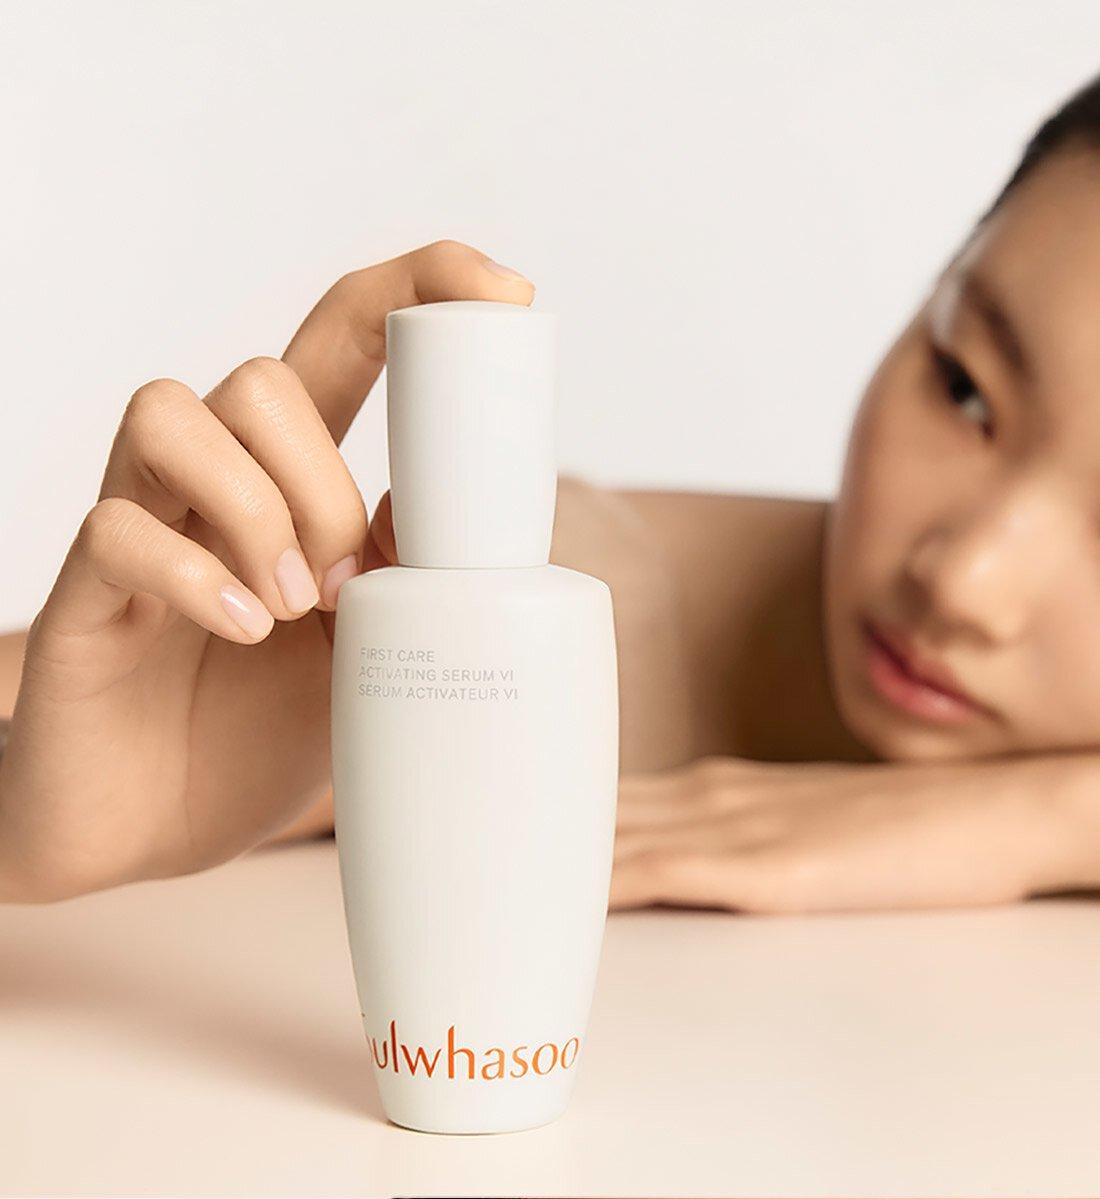 Sulwhasoo First Care Activating. Ảnh: Internet